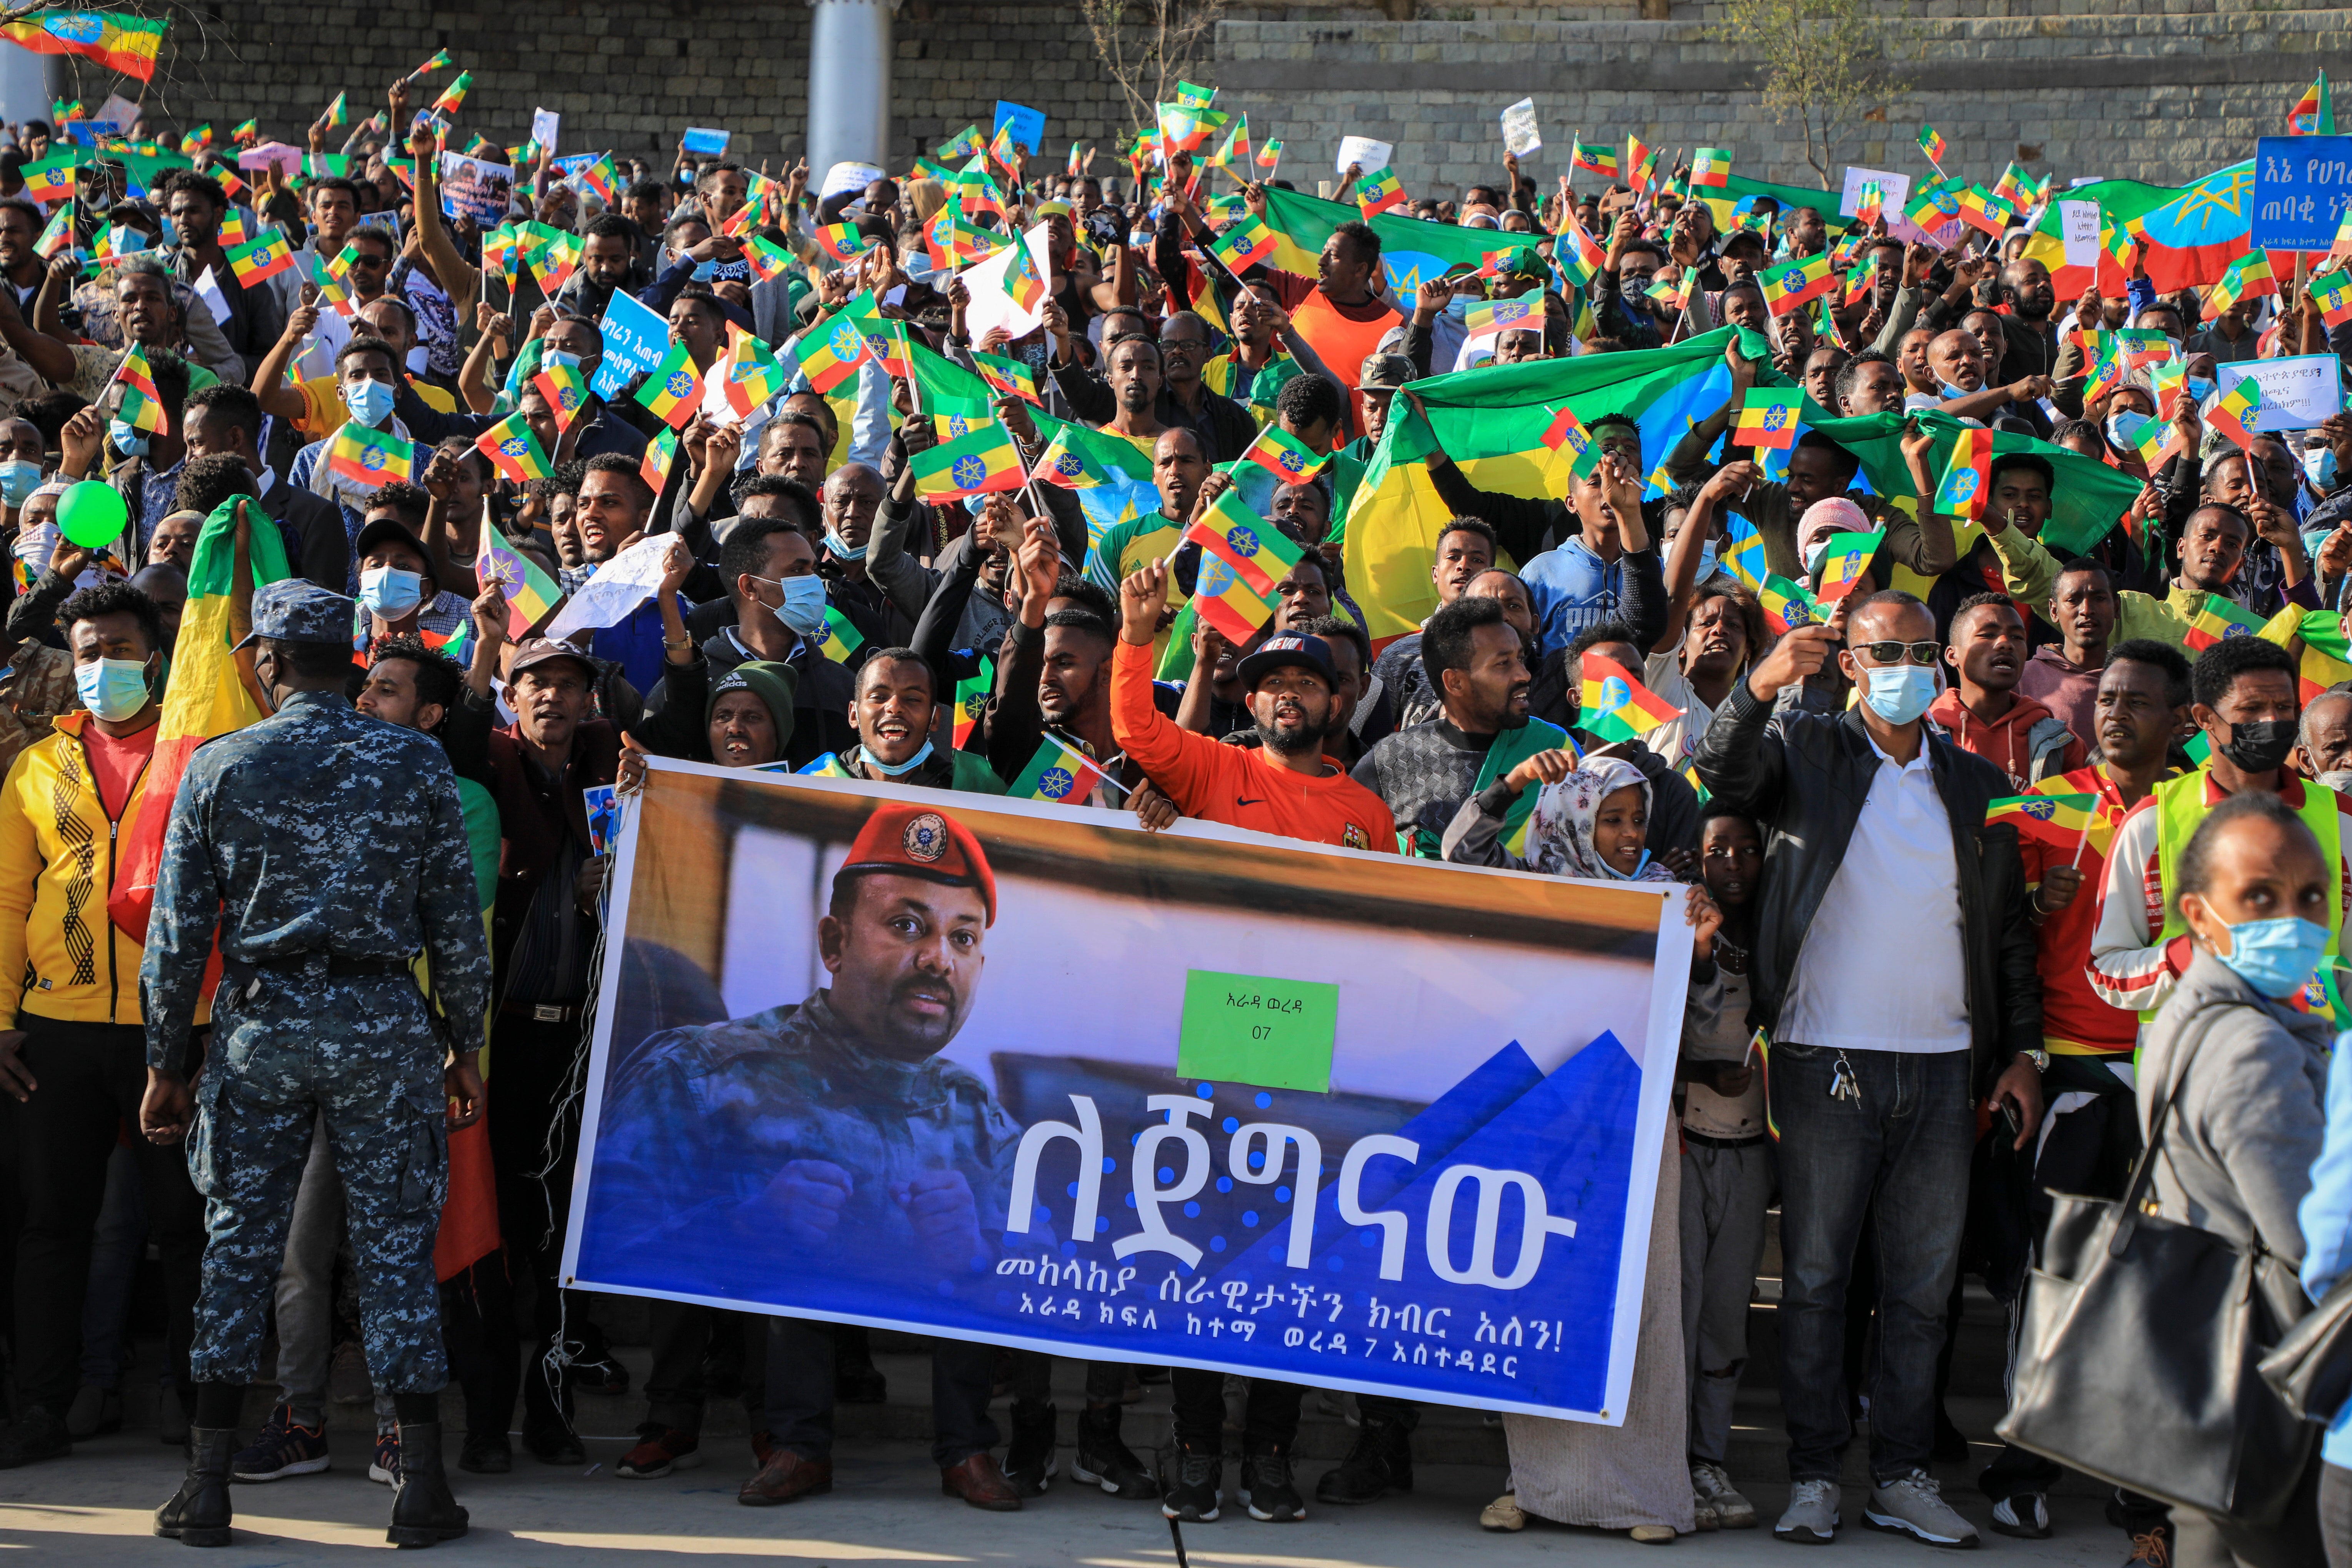 People gather behind a placard showing Prime Minister Abiy Ahmed